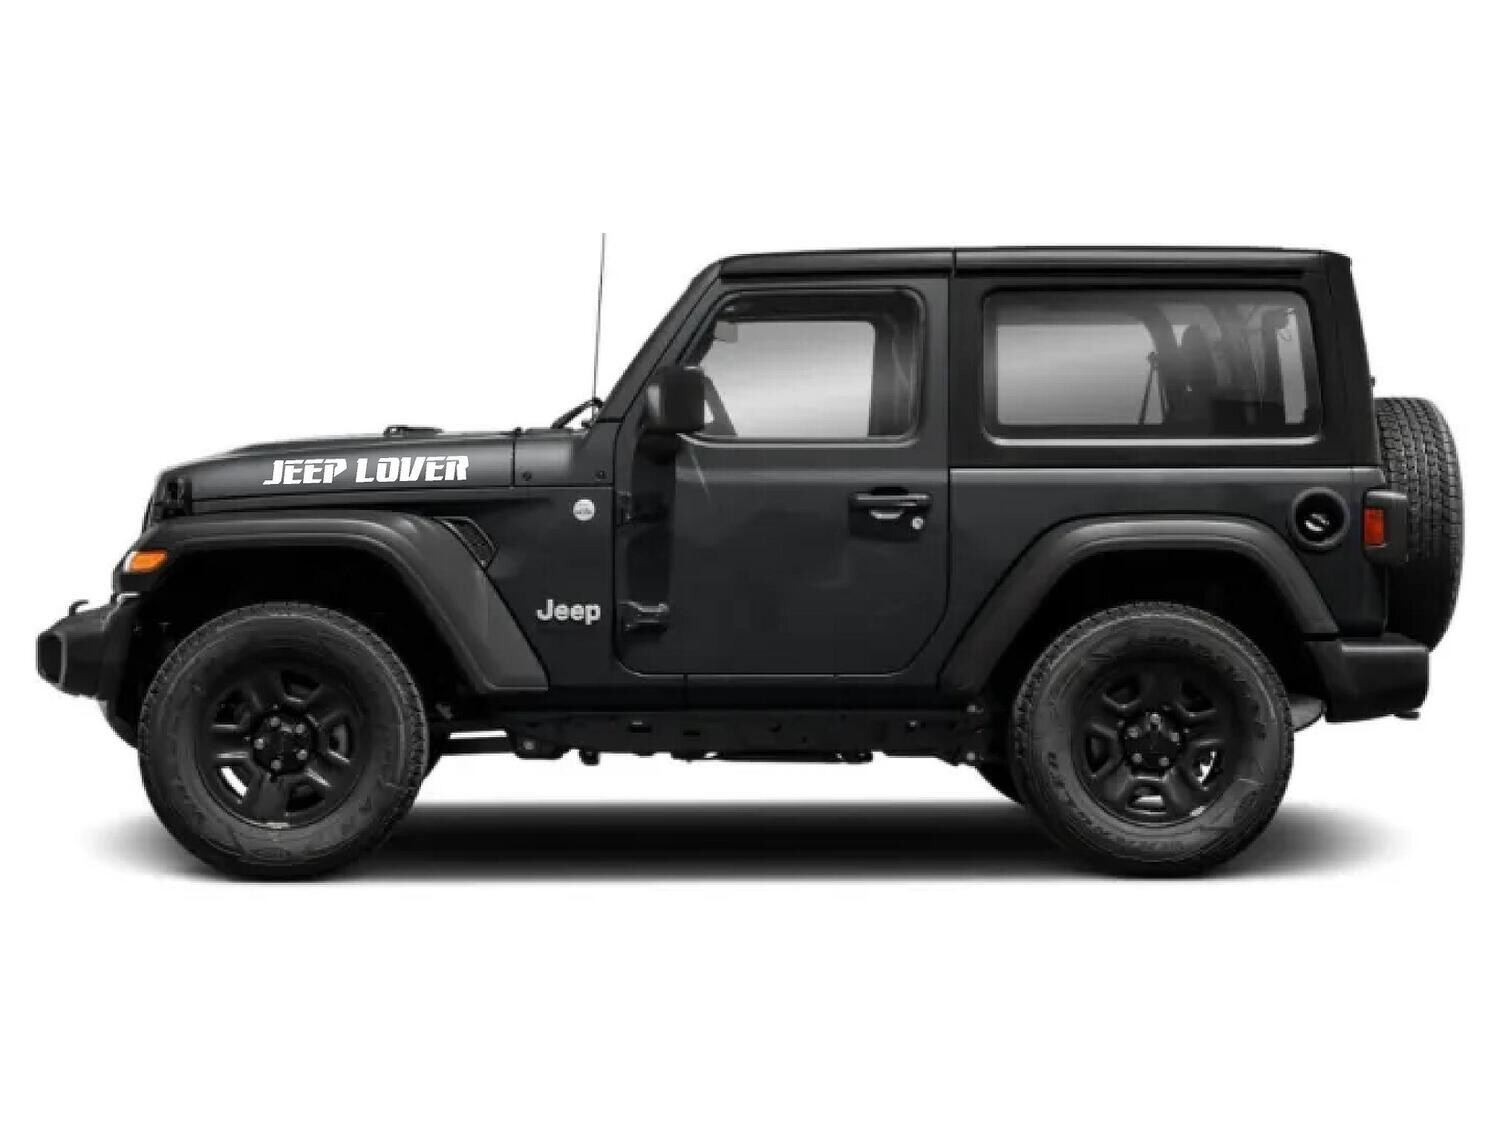 Custom Hood Decals - set of 2 Compatible with Jeep Wrangler